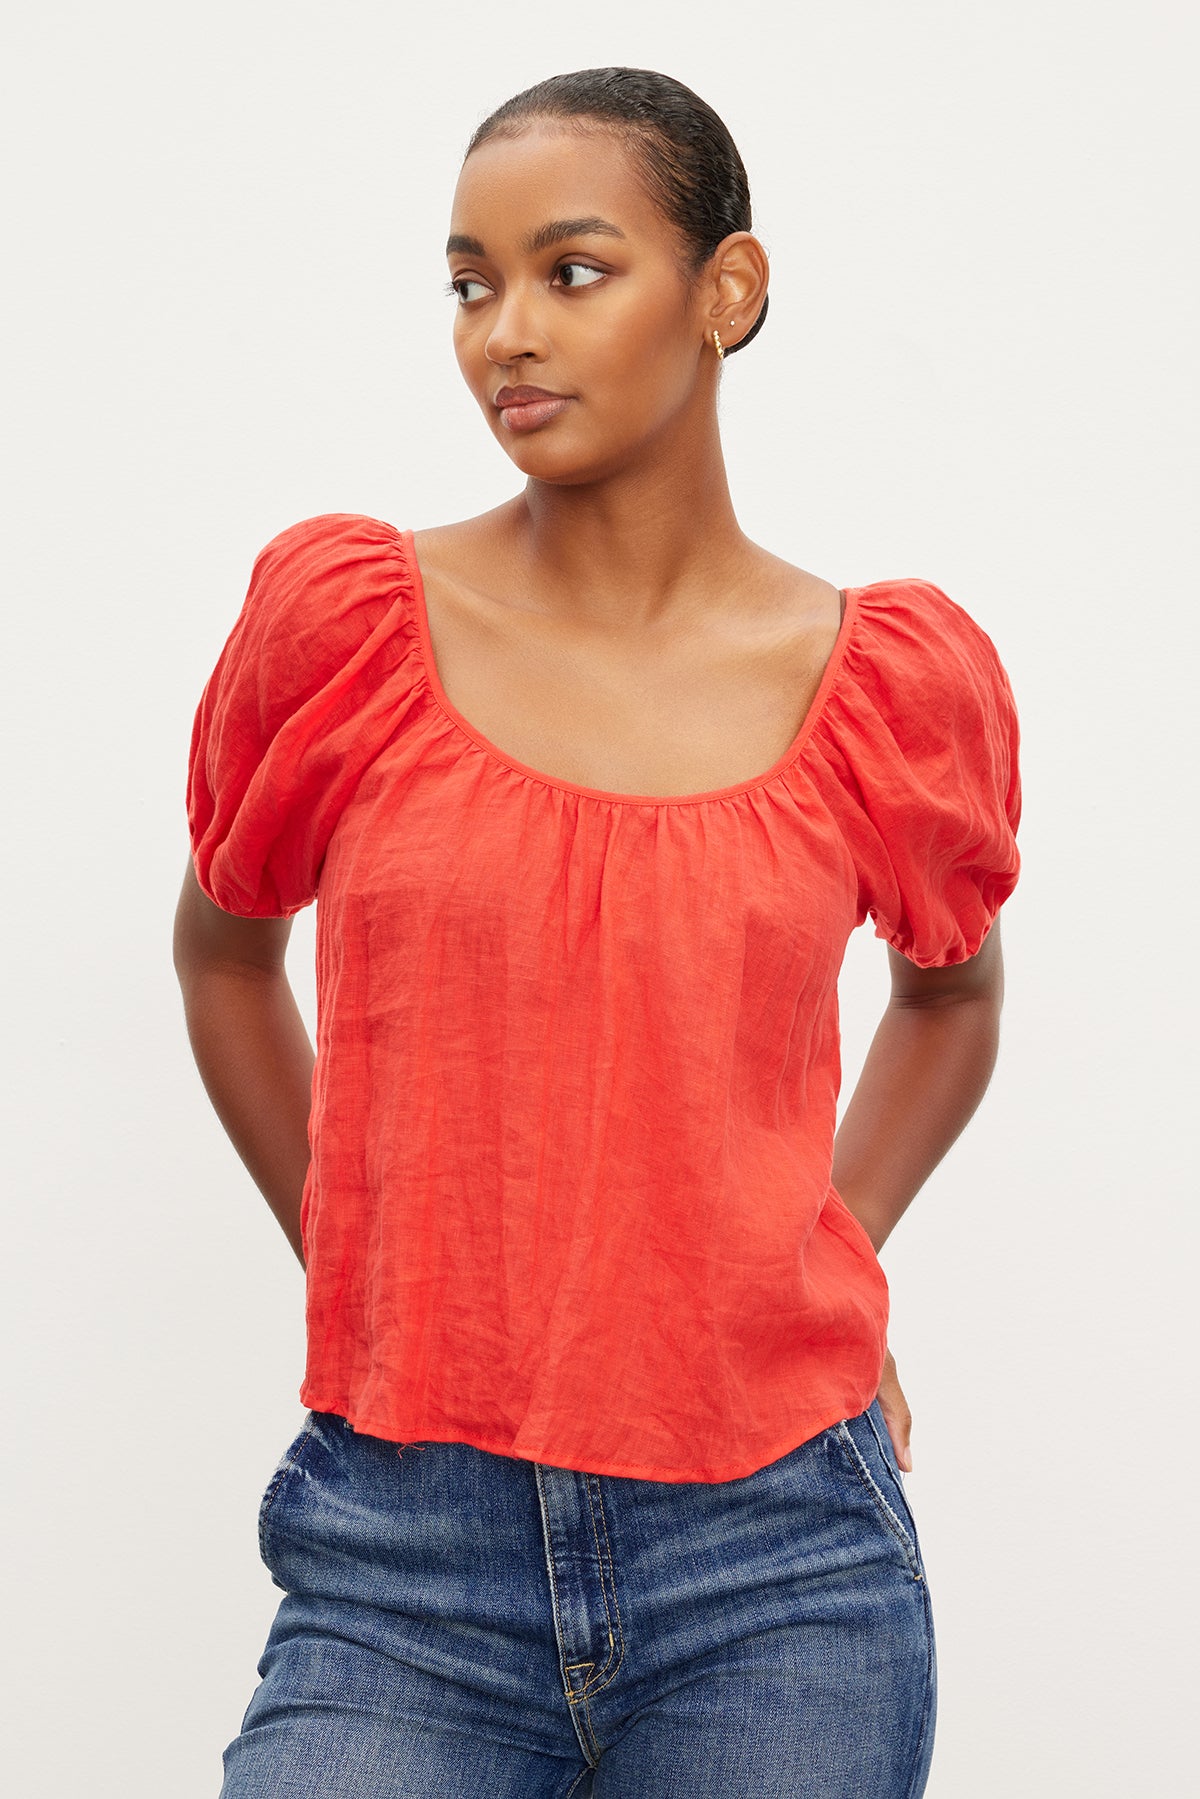 The model is wearing a Velvet by Graham & Spencer DANA LINEN SCOOP NECK TOP with puff sleeves.-35955692241089